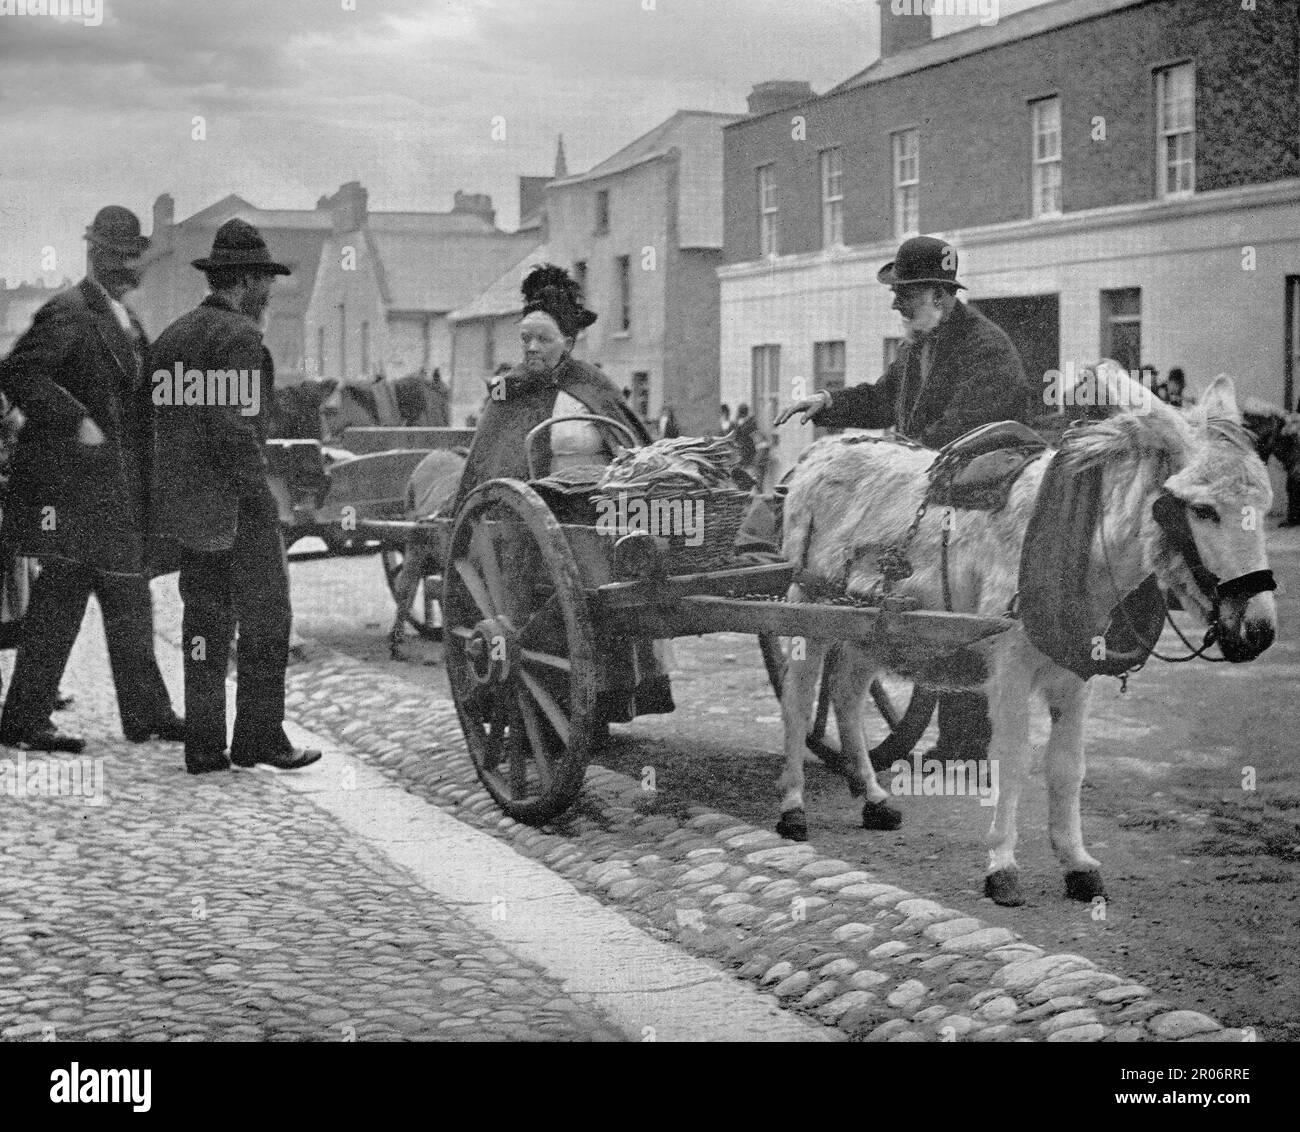 A late 19th century view of a market donkey a street trader during market day in Drogheda, County Louth on the east coast of Ireland. Stock Photo